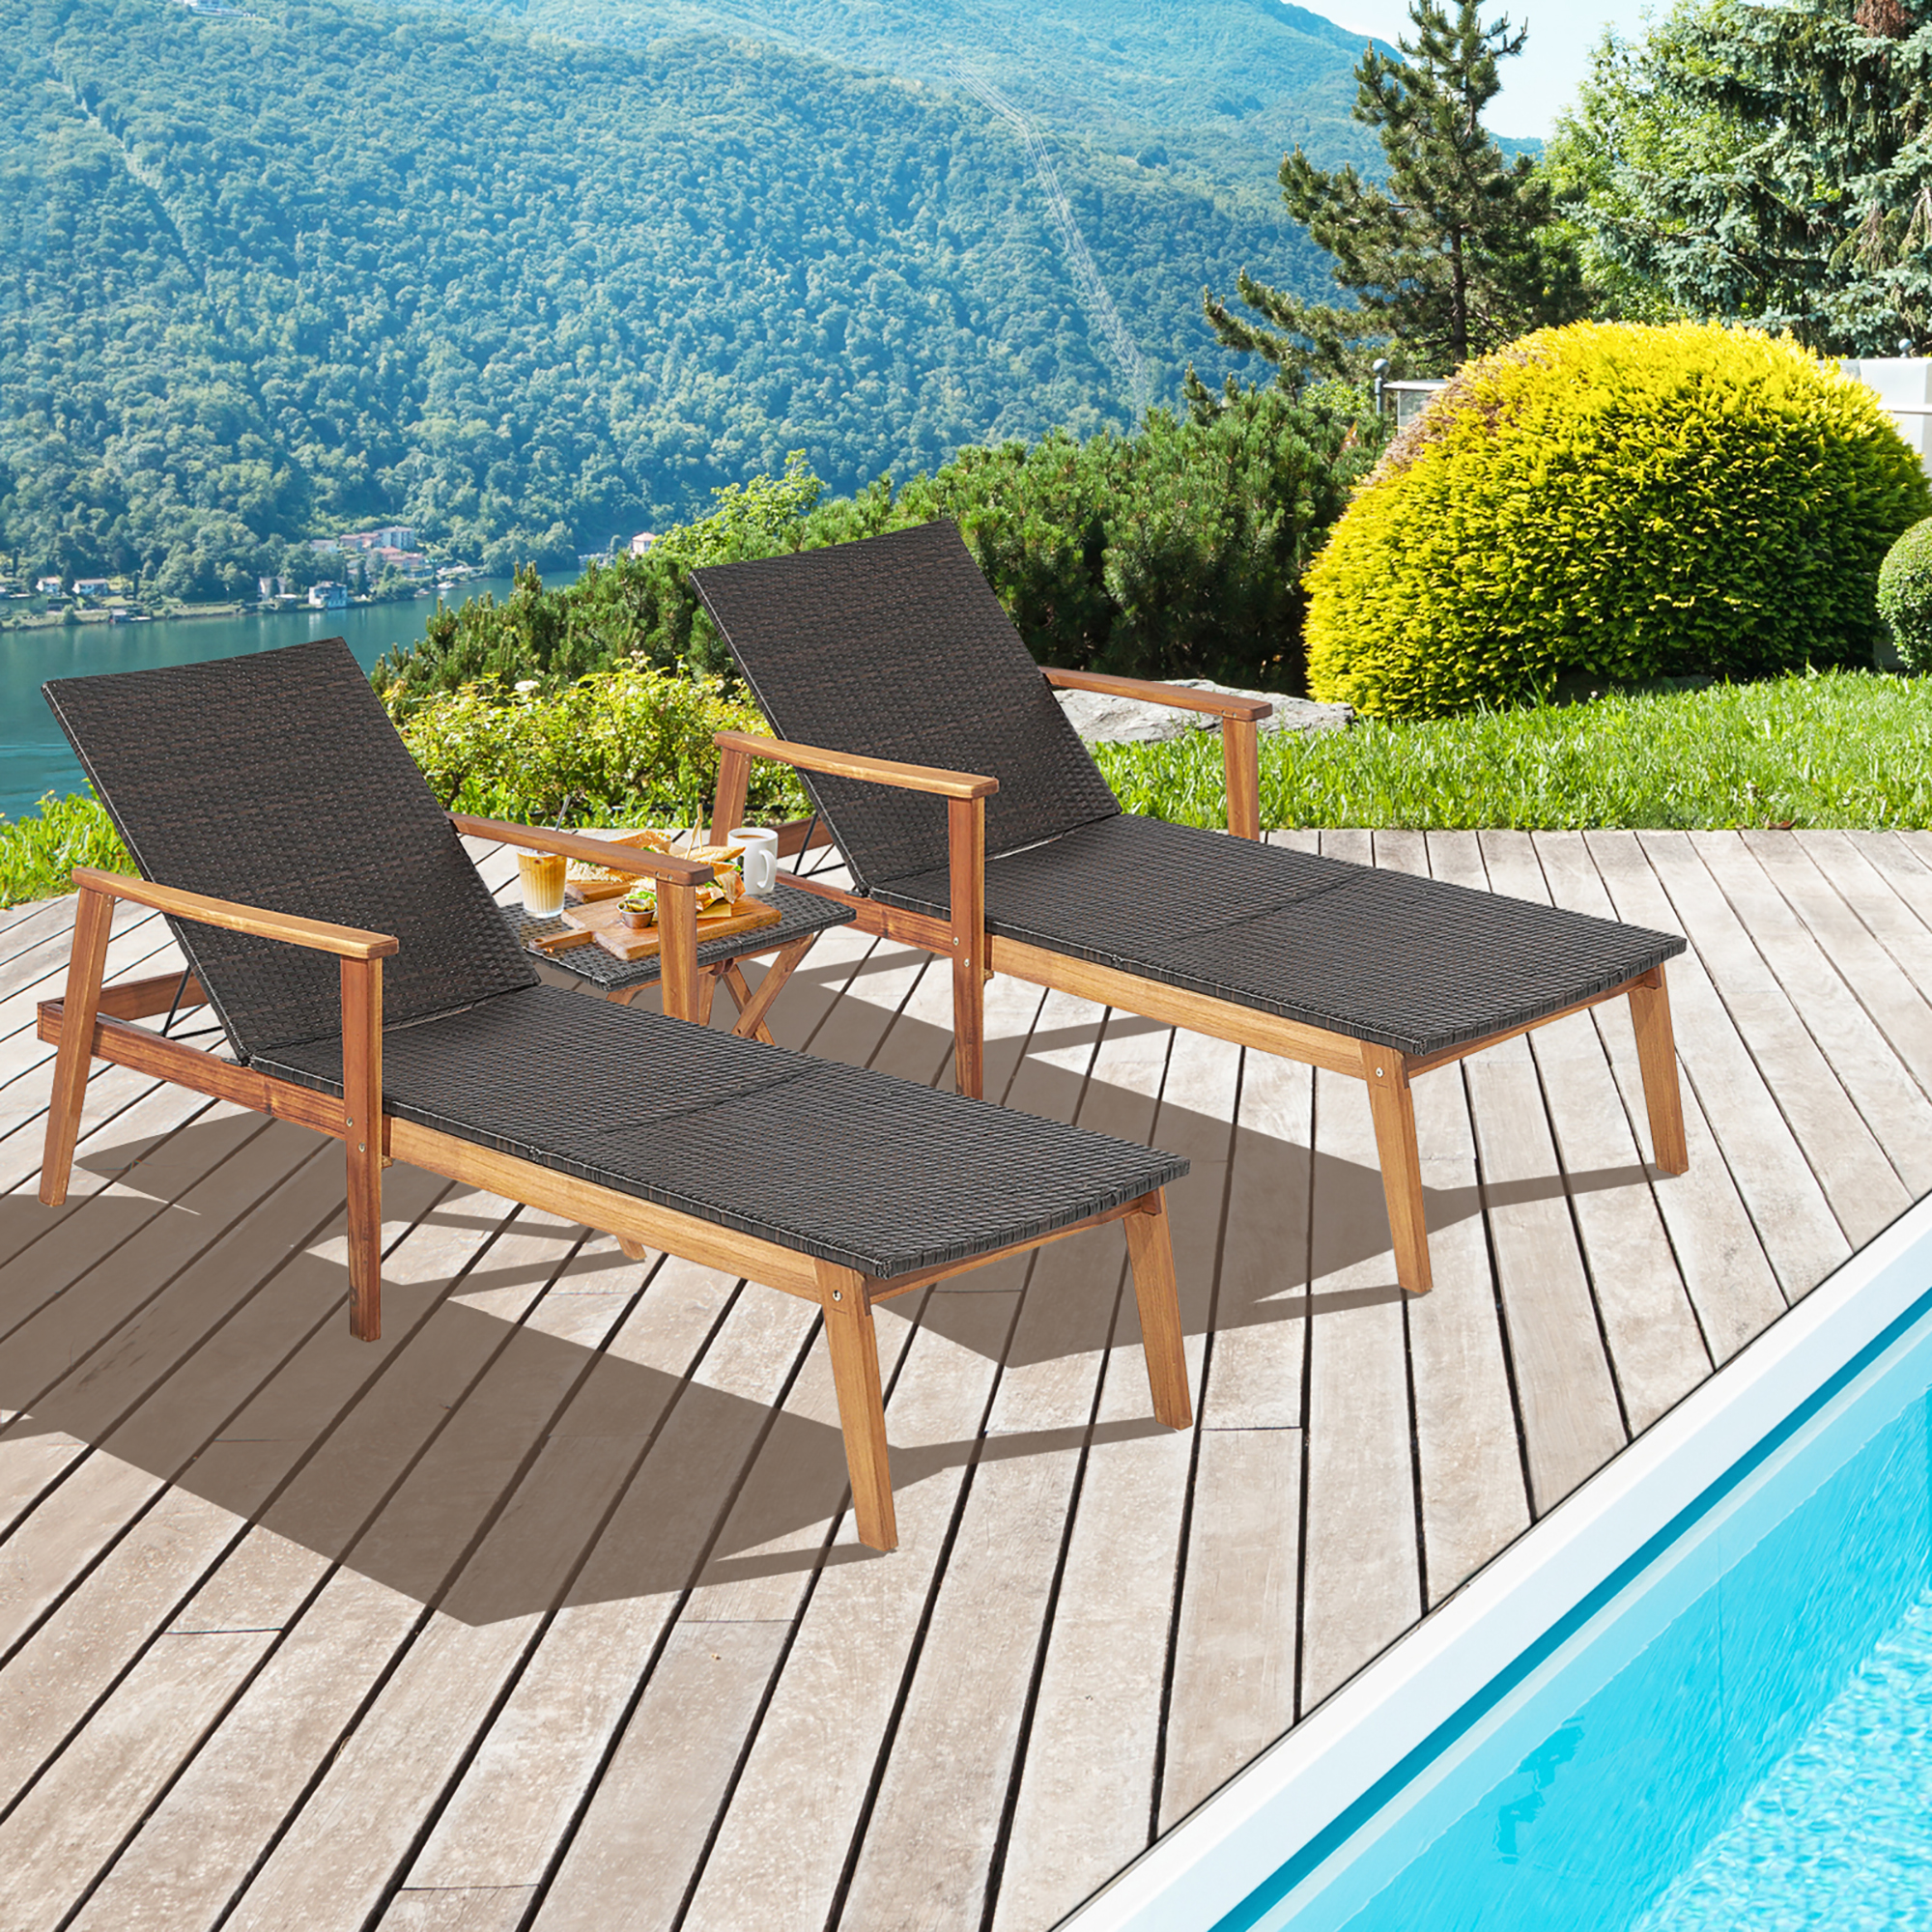 Gymax 3PCS Outdoor Chaise Lounge Set Patio Yard w/ Side Table Adjustable Backrest - image 1 of 10